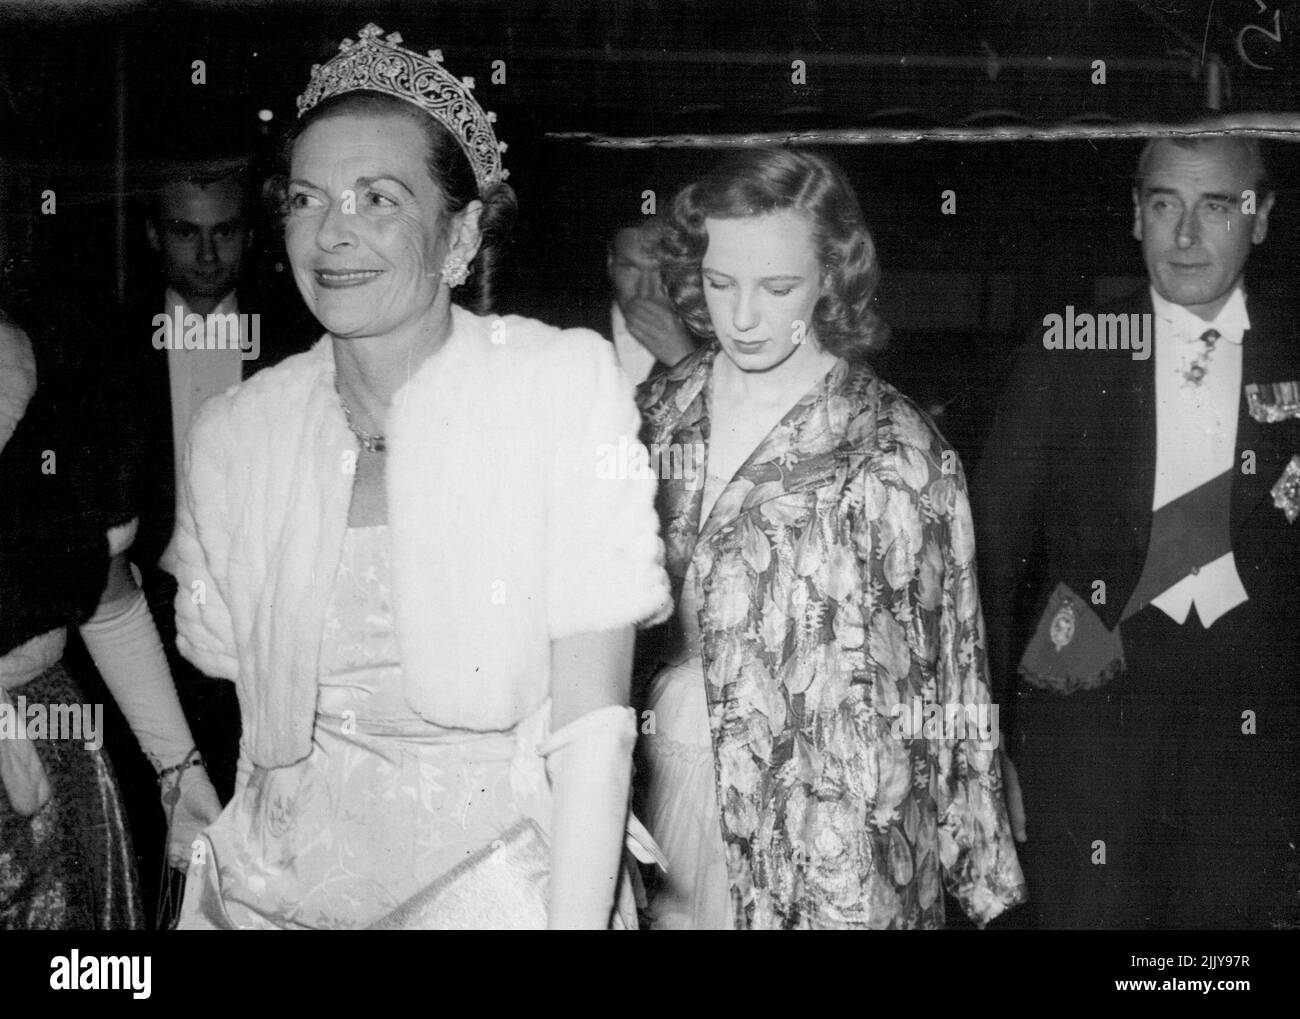 Coming Out Party - Ankunft im Hyde Park Hotel für die Coming Out Party sind links nach rechts:- Lady Mountbatten und ihre Tochter Lady Pamela Mountbatten und Lord Louis Mountbatten. 22. Juni 1950. (Foto von Daily Mail Contract Picture). Stockfoto